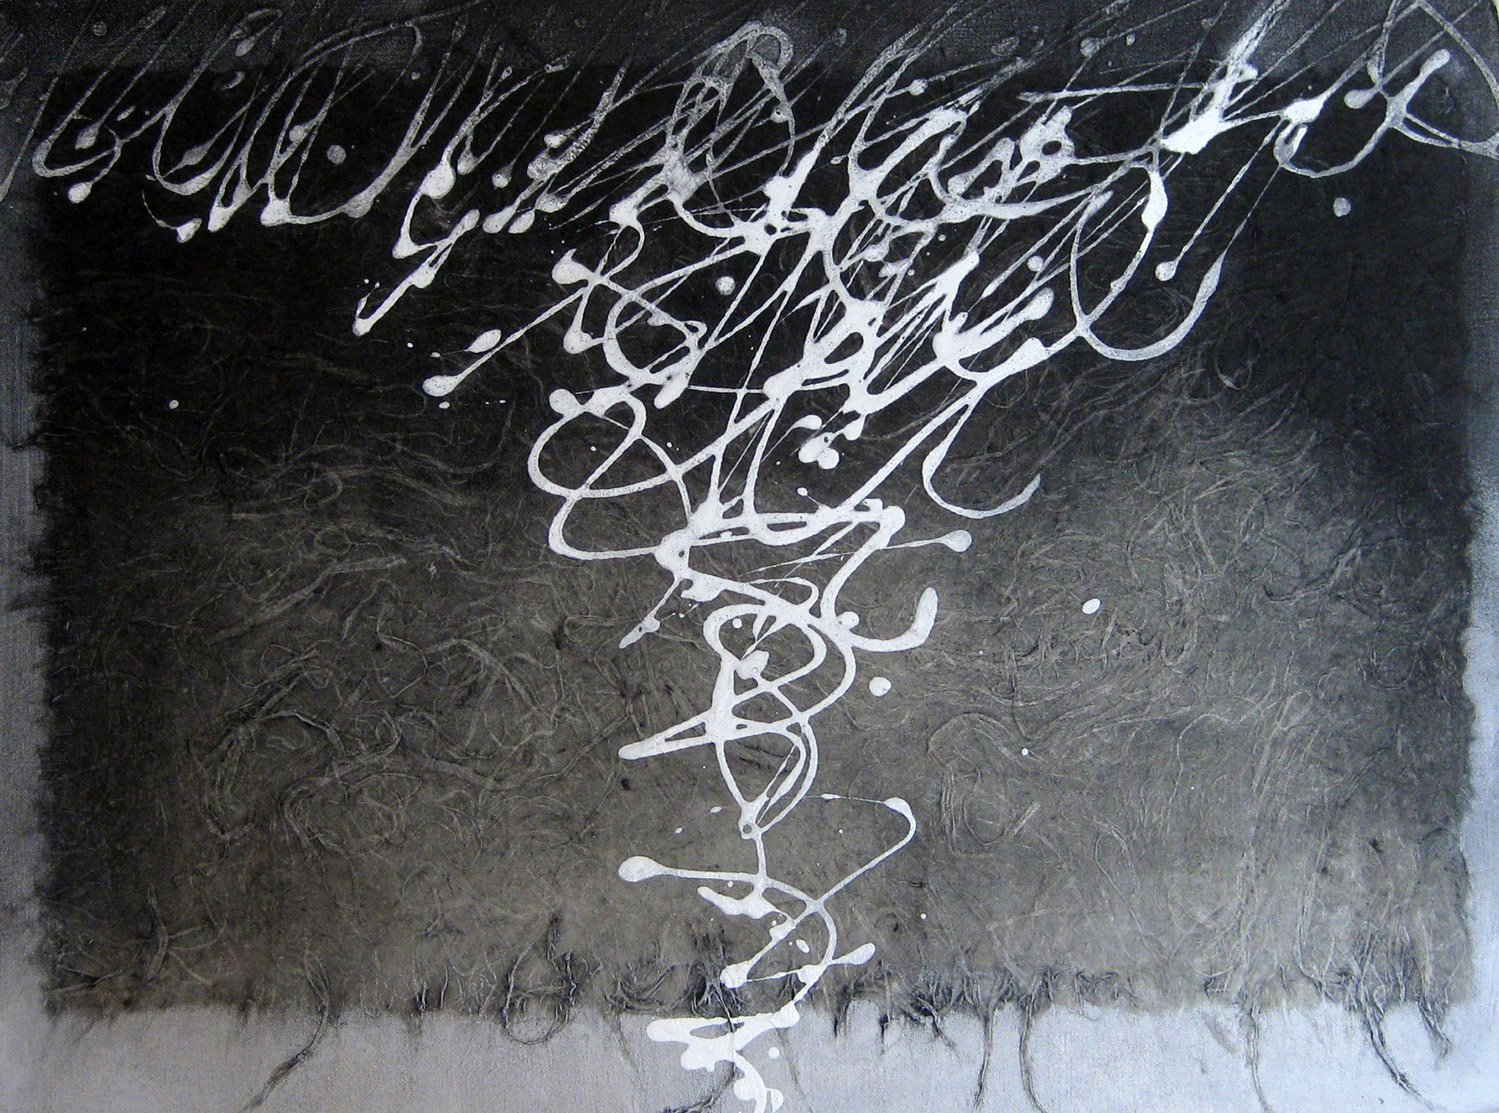   Third Script #9, Nyaz , 2006, acrylic on canvas on mulberry paper, 18” x 24”, Private Collection 